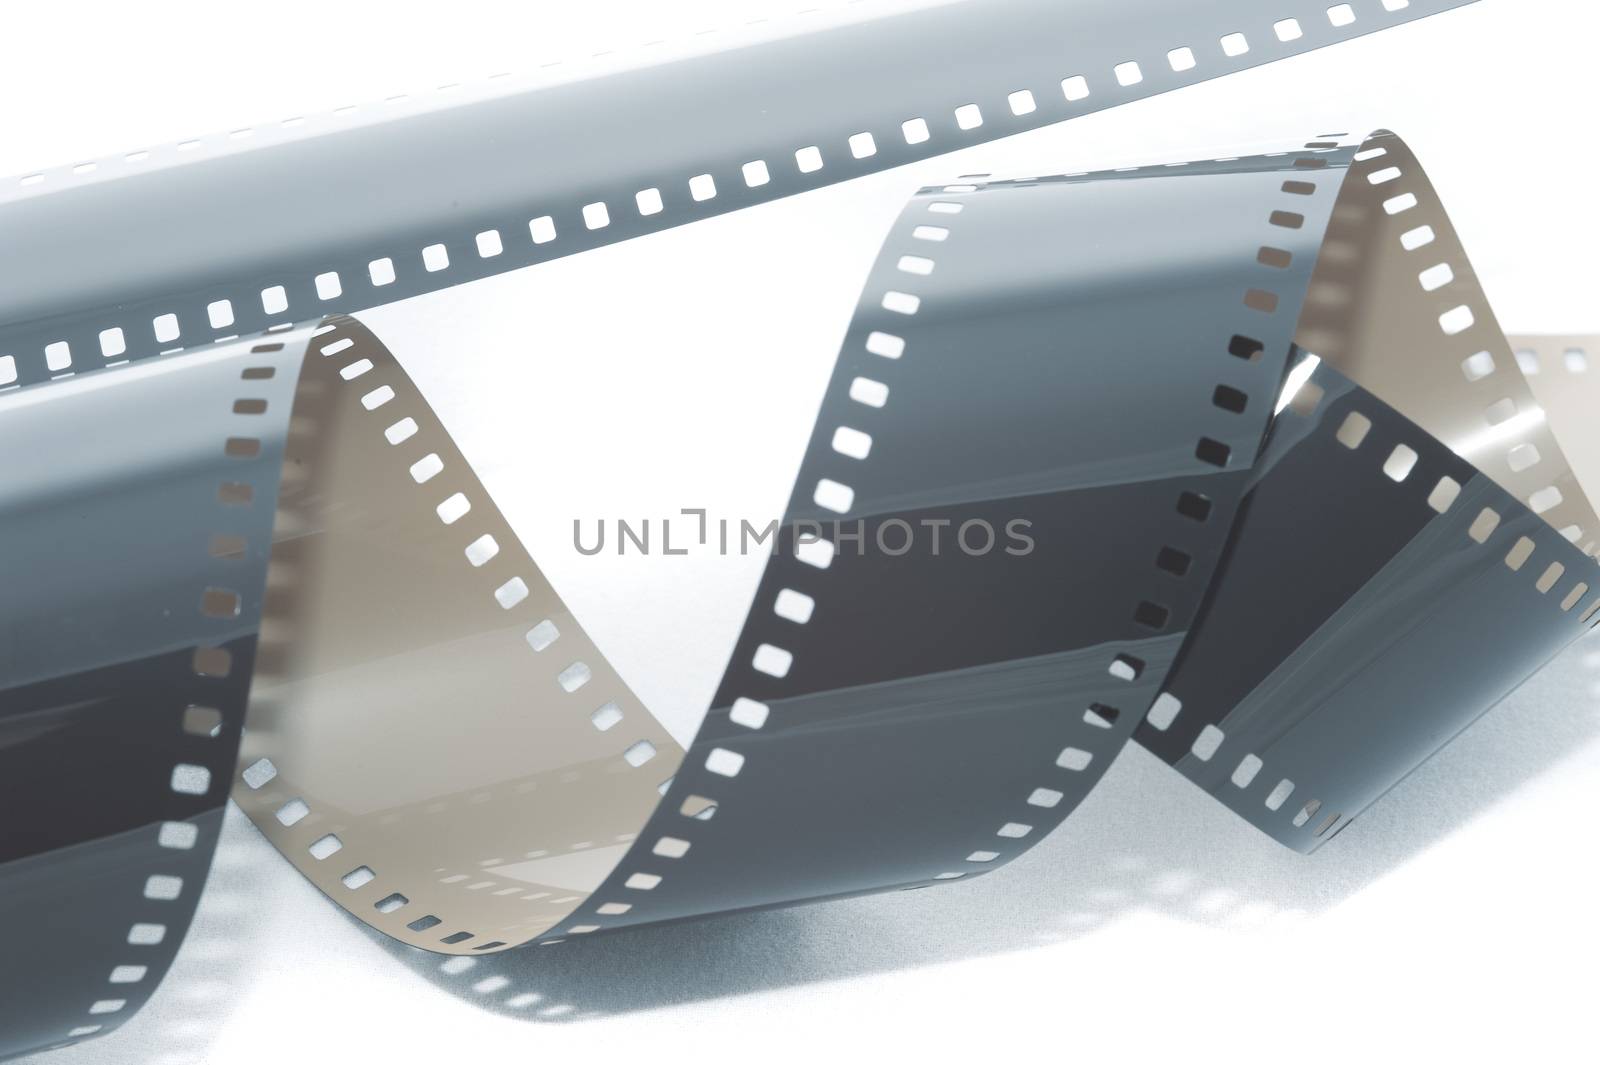 Coiled roll of exposed 35 mm film unrolled on a white background in a cinematic or photographic background